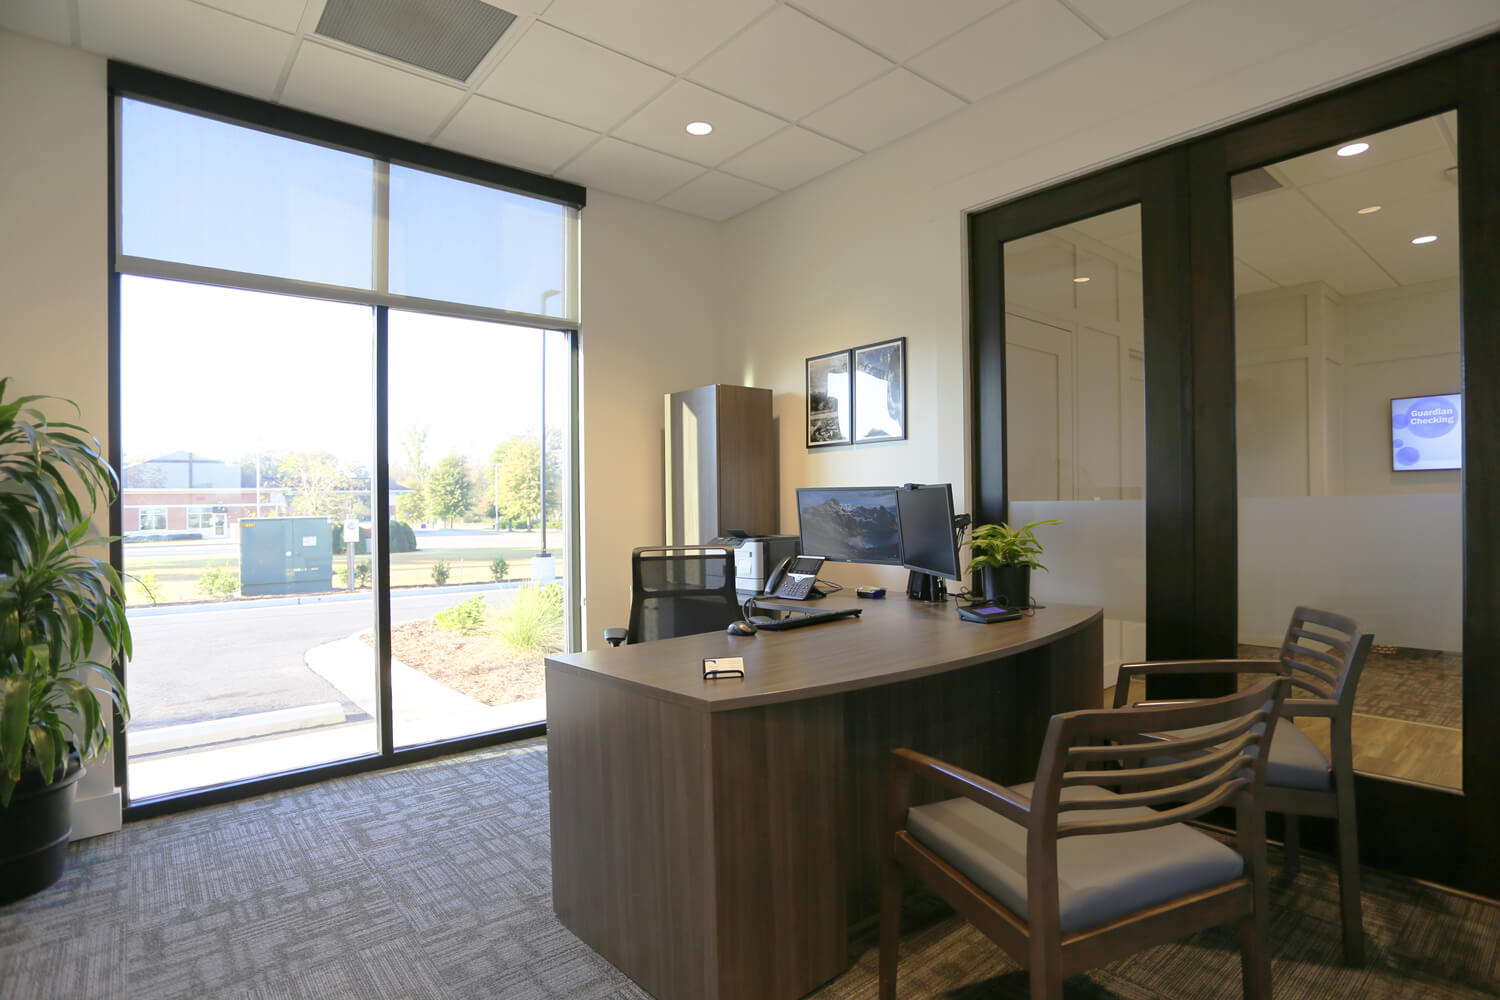 Guardian Credit Union - Wetumpka - Private Office - Designed by Foshee Architecture